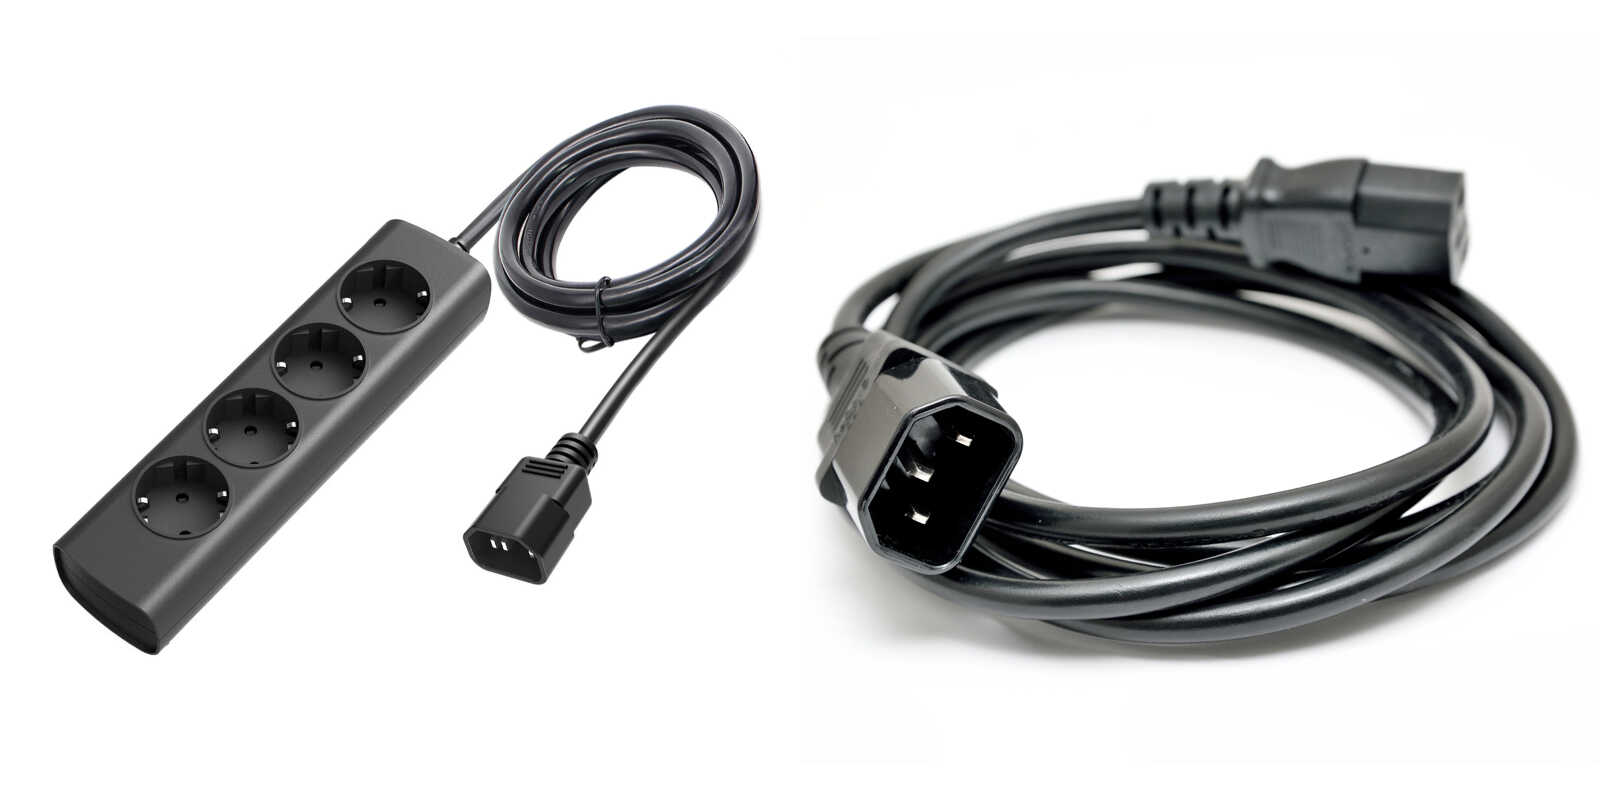 For connecting devices extending power cords fitted on one end with the C13 connector (male) and on the other end with the C14 connector (female) are usually used that can be plugged into any normal PC power source.If necessary, we can provide a power cord terminated with three classic EURO sockets (3 × type E socket) to the customer